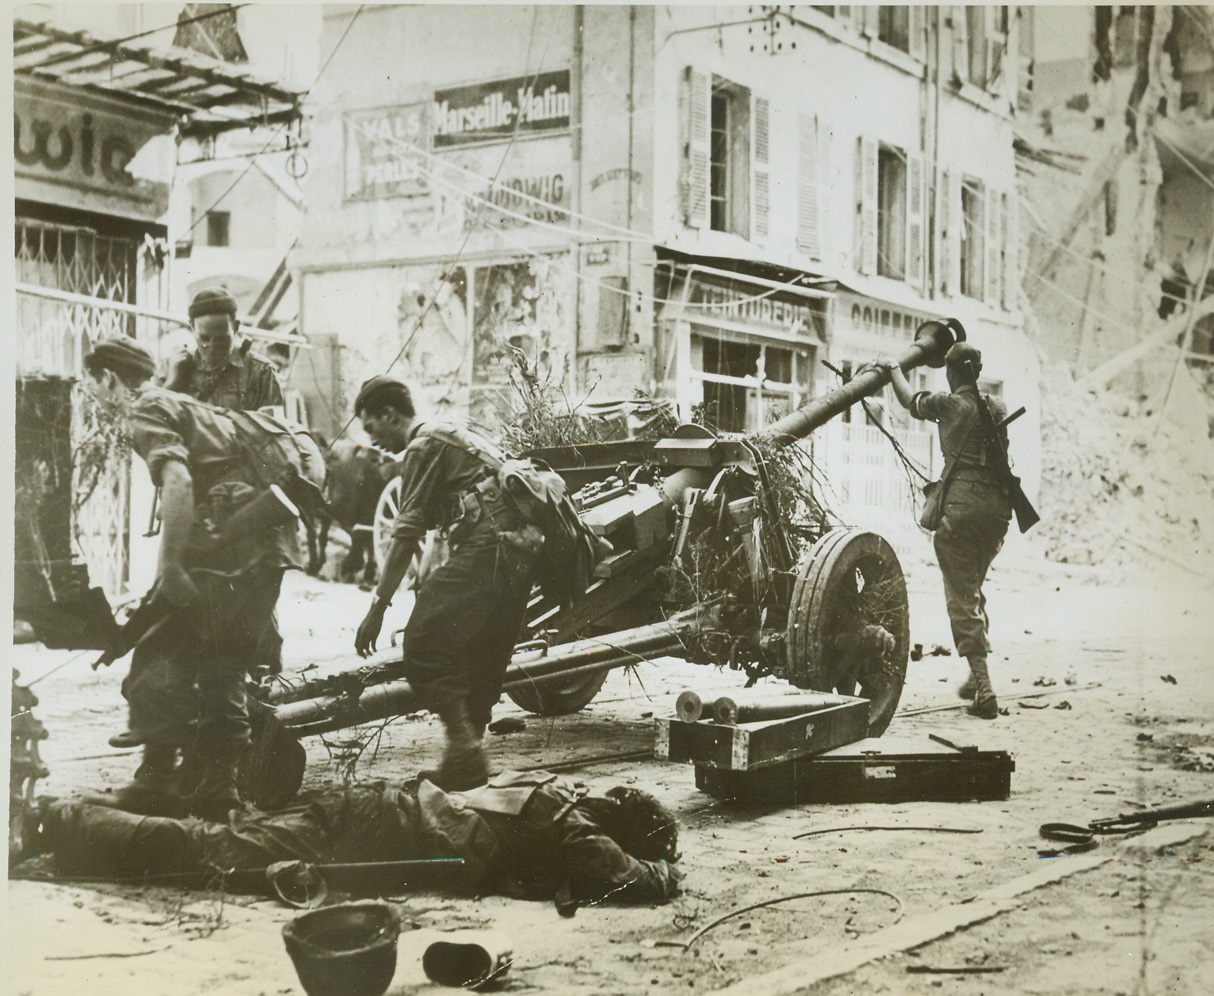 Nazi Gun Put to Use by Allies, 9/9/1944. France—A captured Nazi gun is wheeled about to face remnants of German forces which had been holding out against French troops in Toulon. In foreground is the body of a dead Nazi gunner. Credit: U.S. Navy photo from ACME;